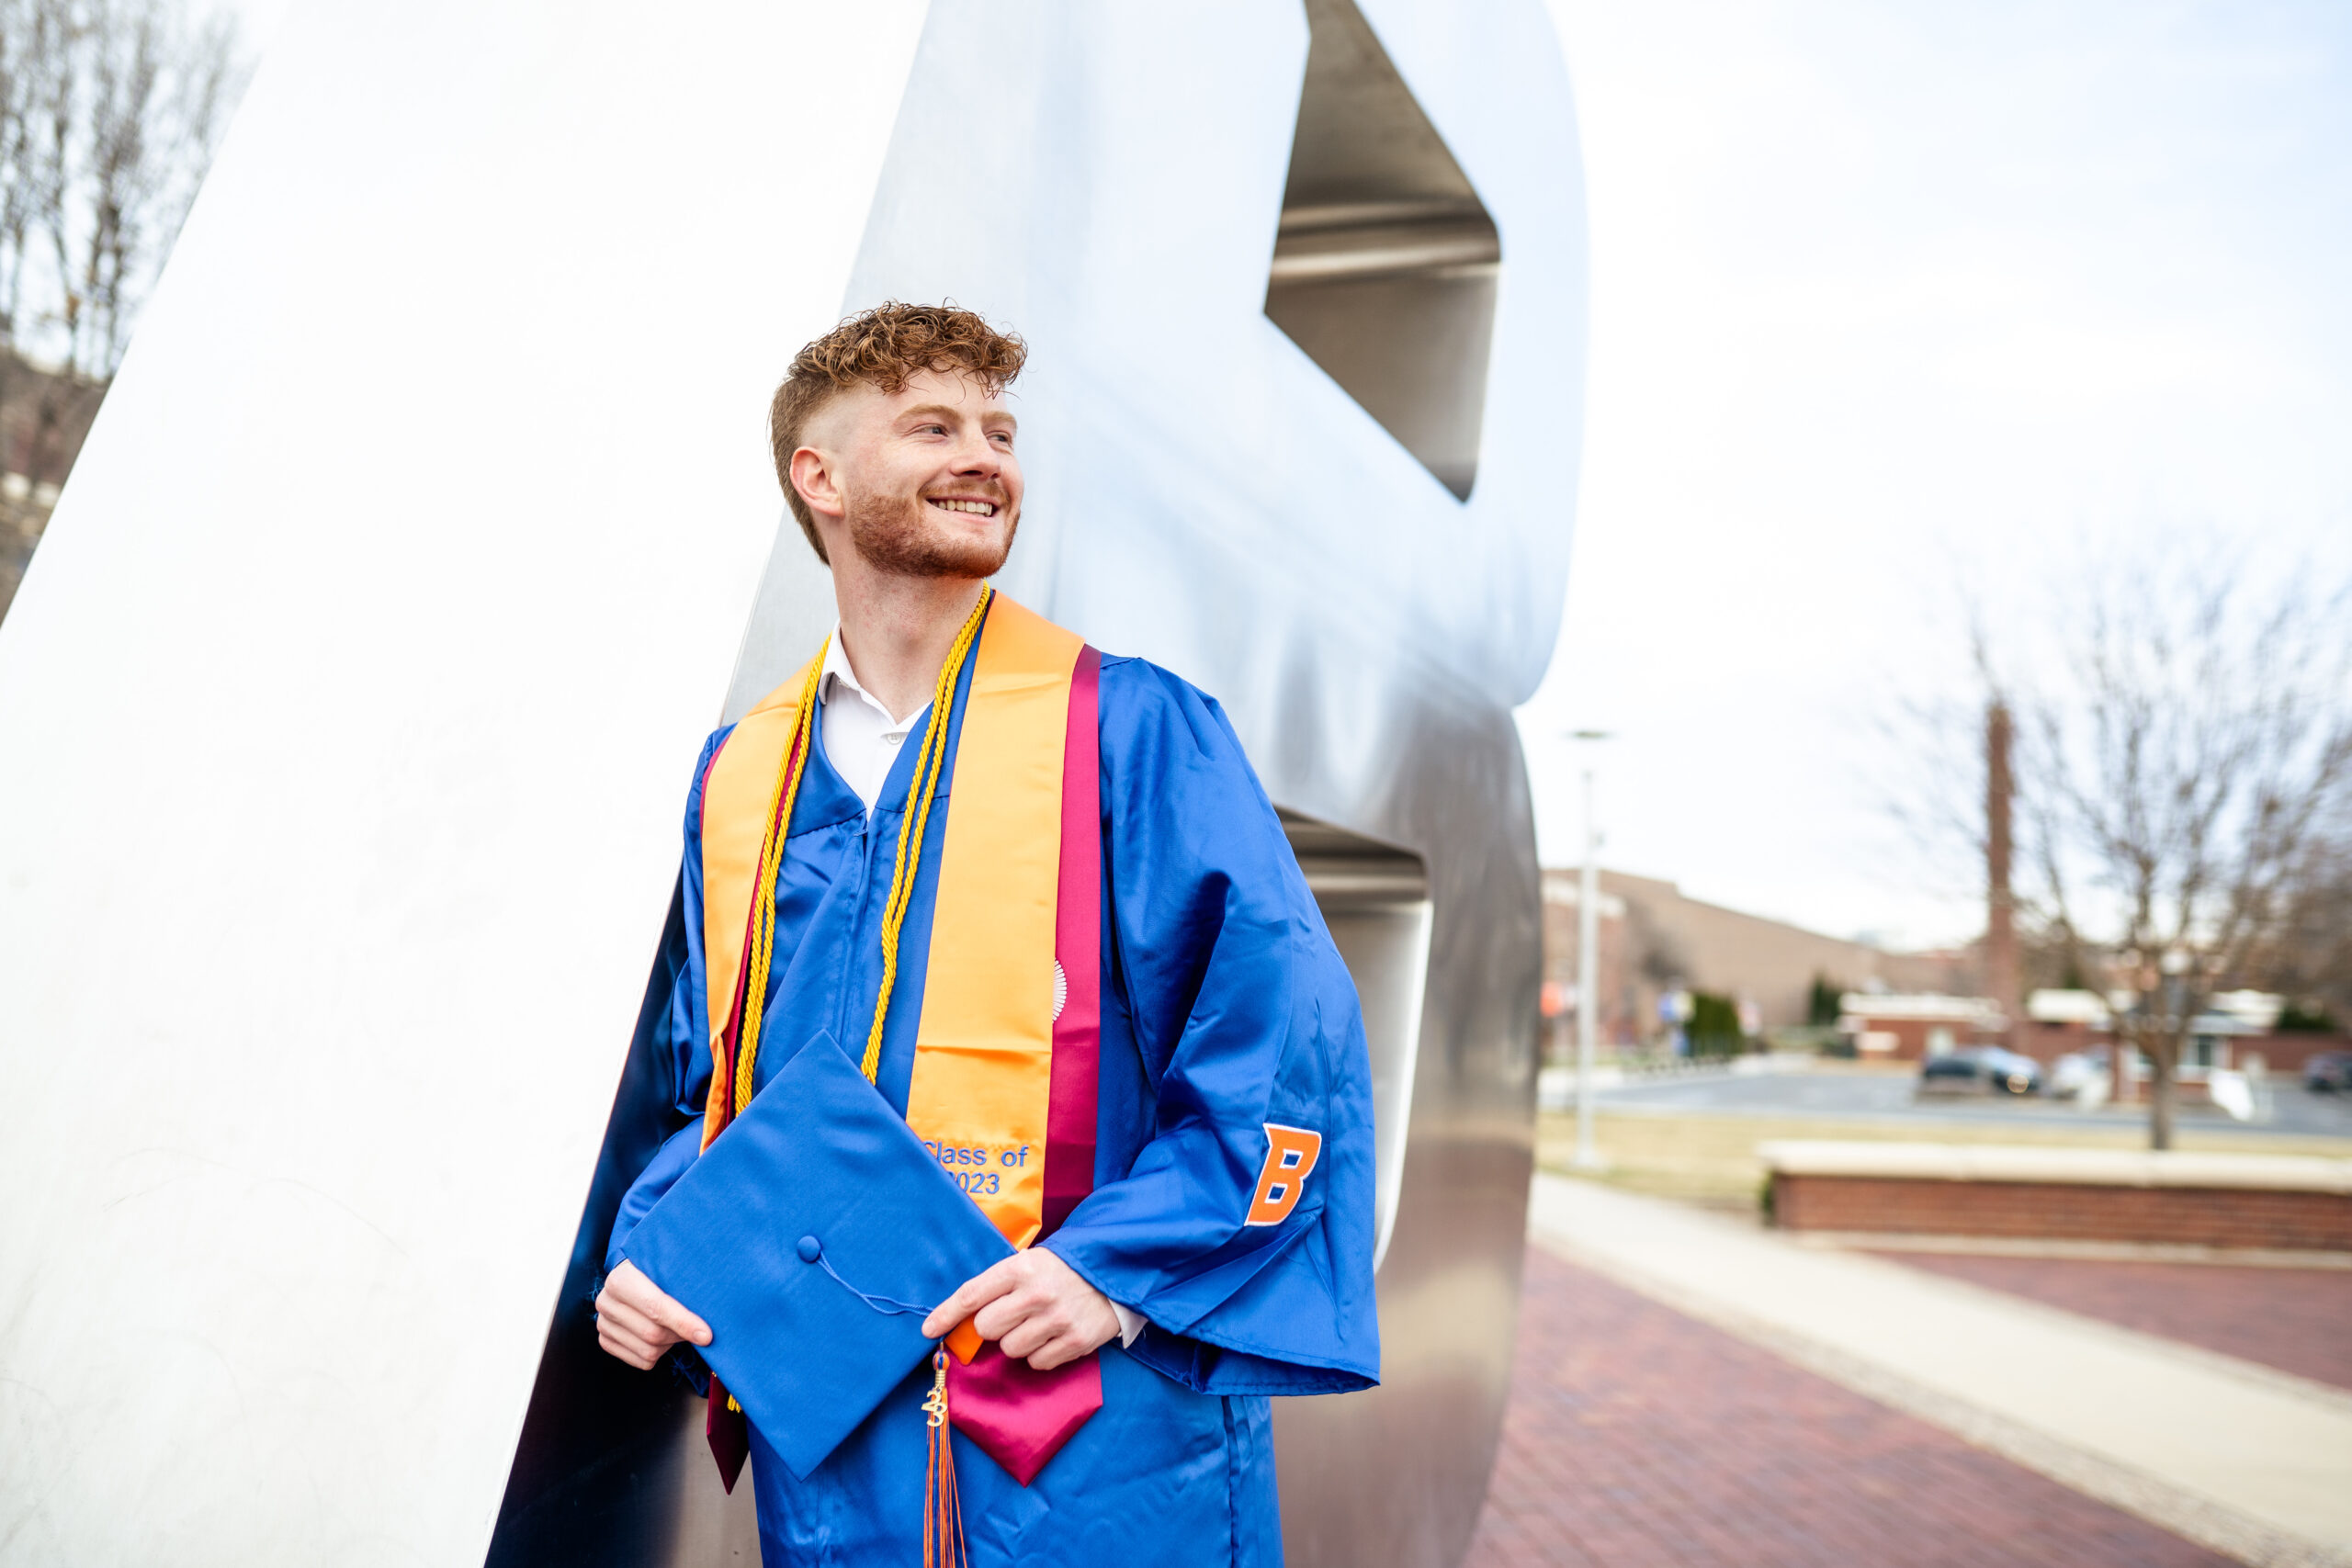 Zack Tyree, wearing his commencement regalia, poses in front of the "B" on campus.